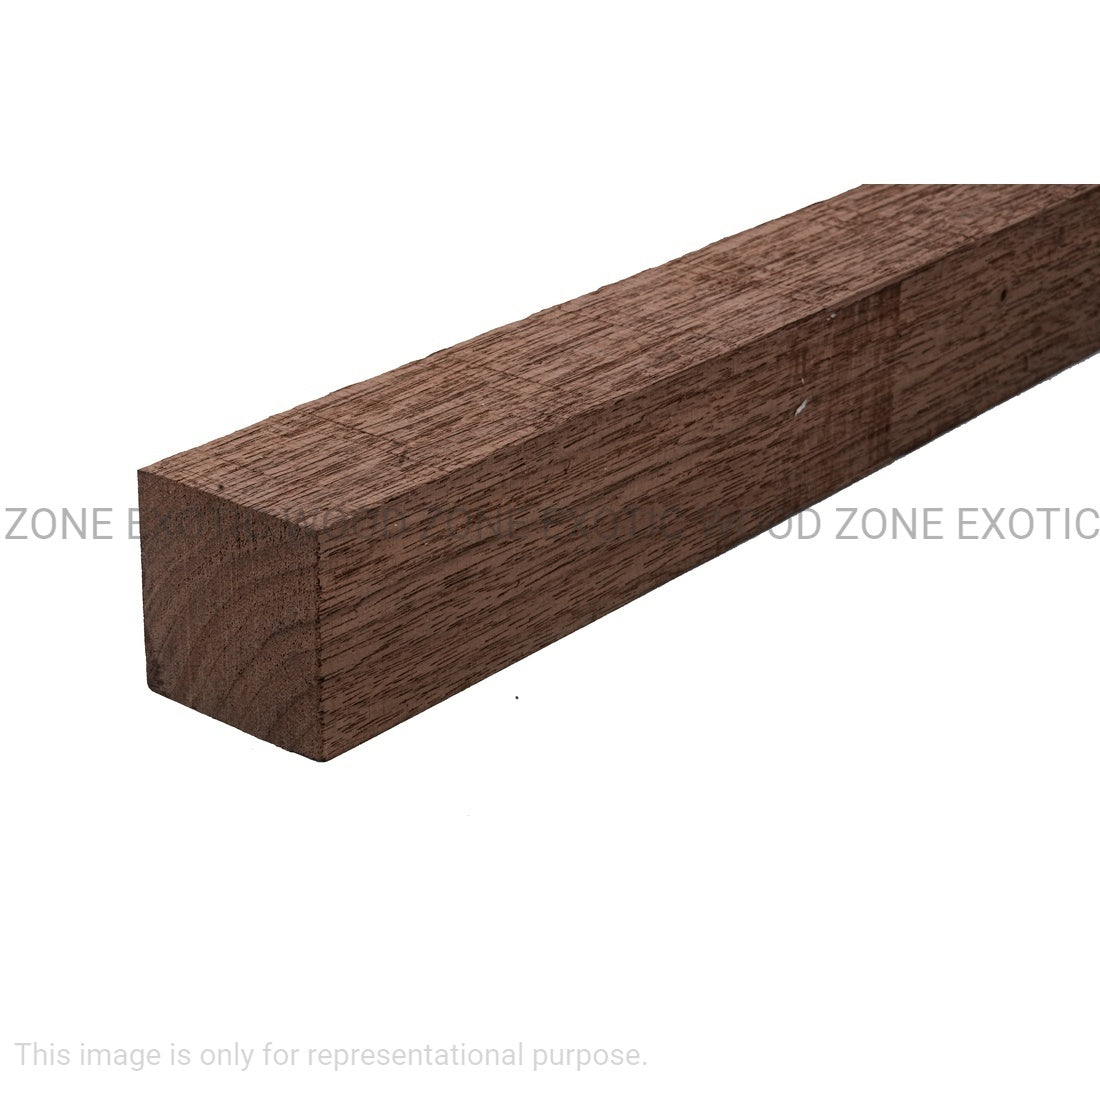 American Black Walnut Wood Pool Cue Blanks 1-1/2&quot;x 1-1/2&quot;x 24&quot; - Exotic Wood Zone - Buy online Across USA 